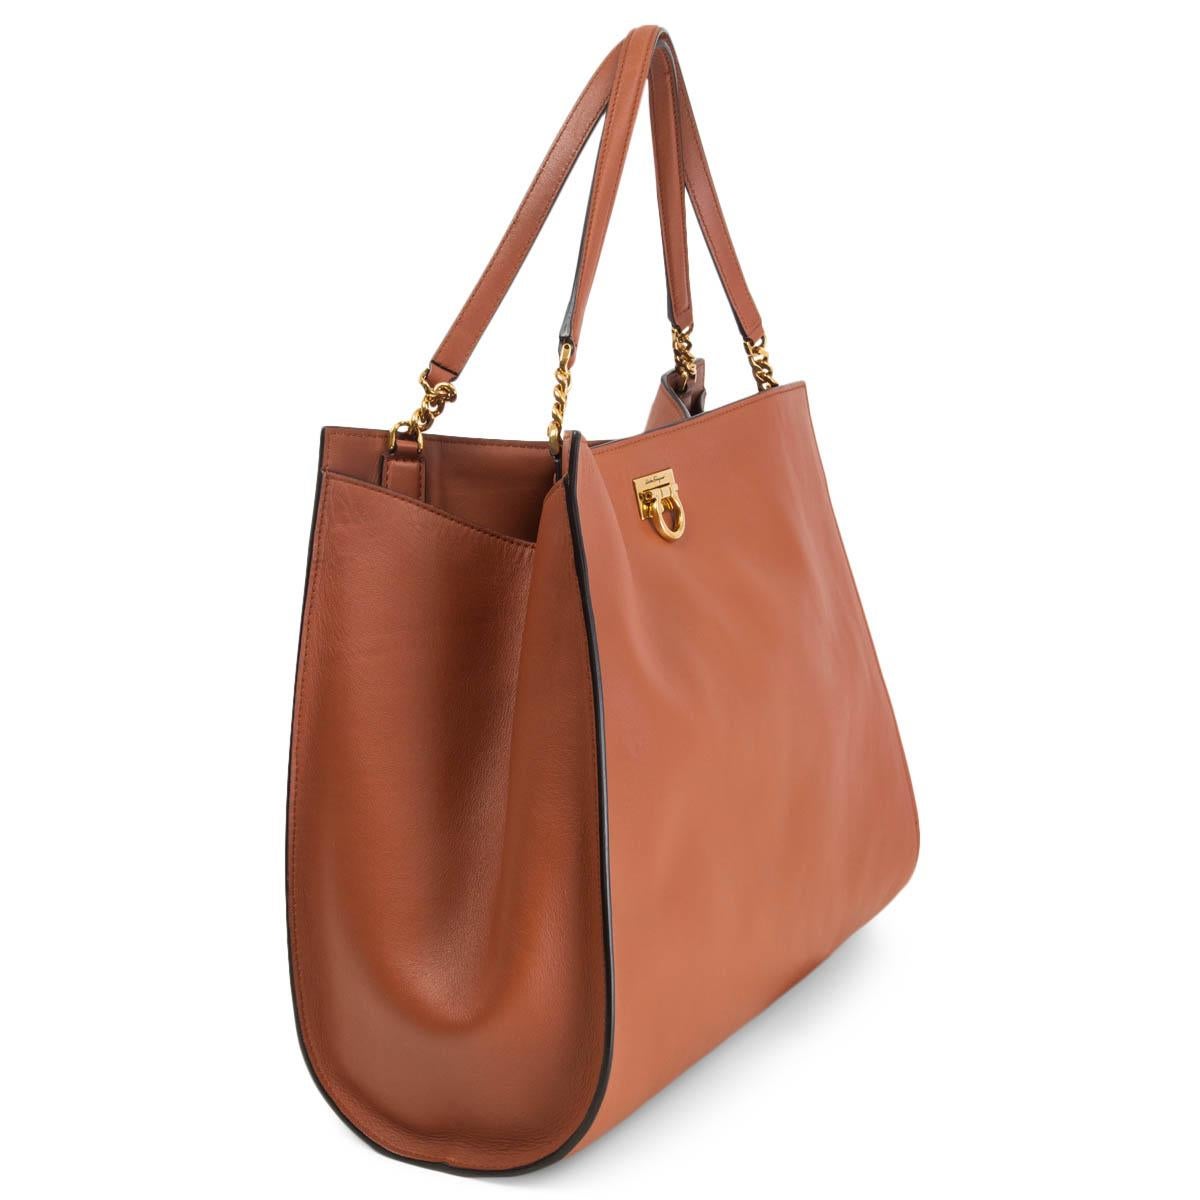 100% authentic Salvatore Ferragamo Trifolio Tote in siena brown soft, matte Italian calf leather. The interior is lined in brown leather with a removable pouch and three flat pockets against the back. The clasp has metal hooks in an antique golden